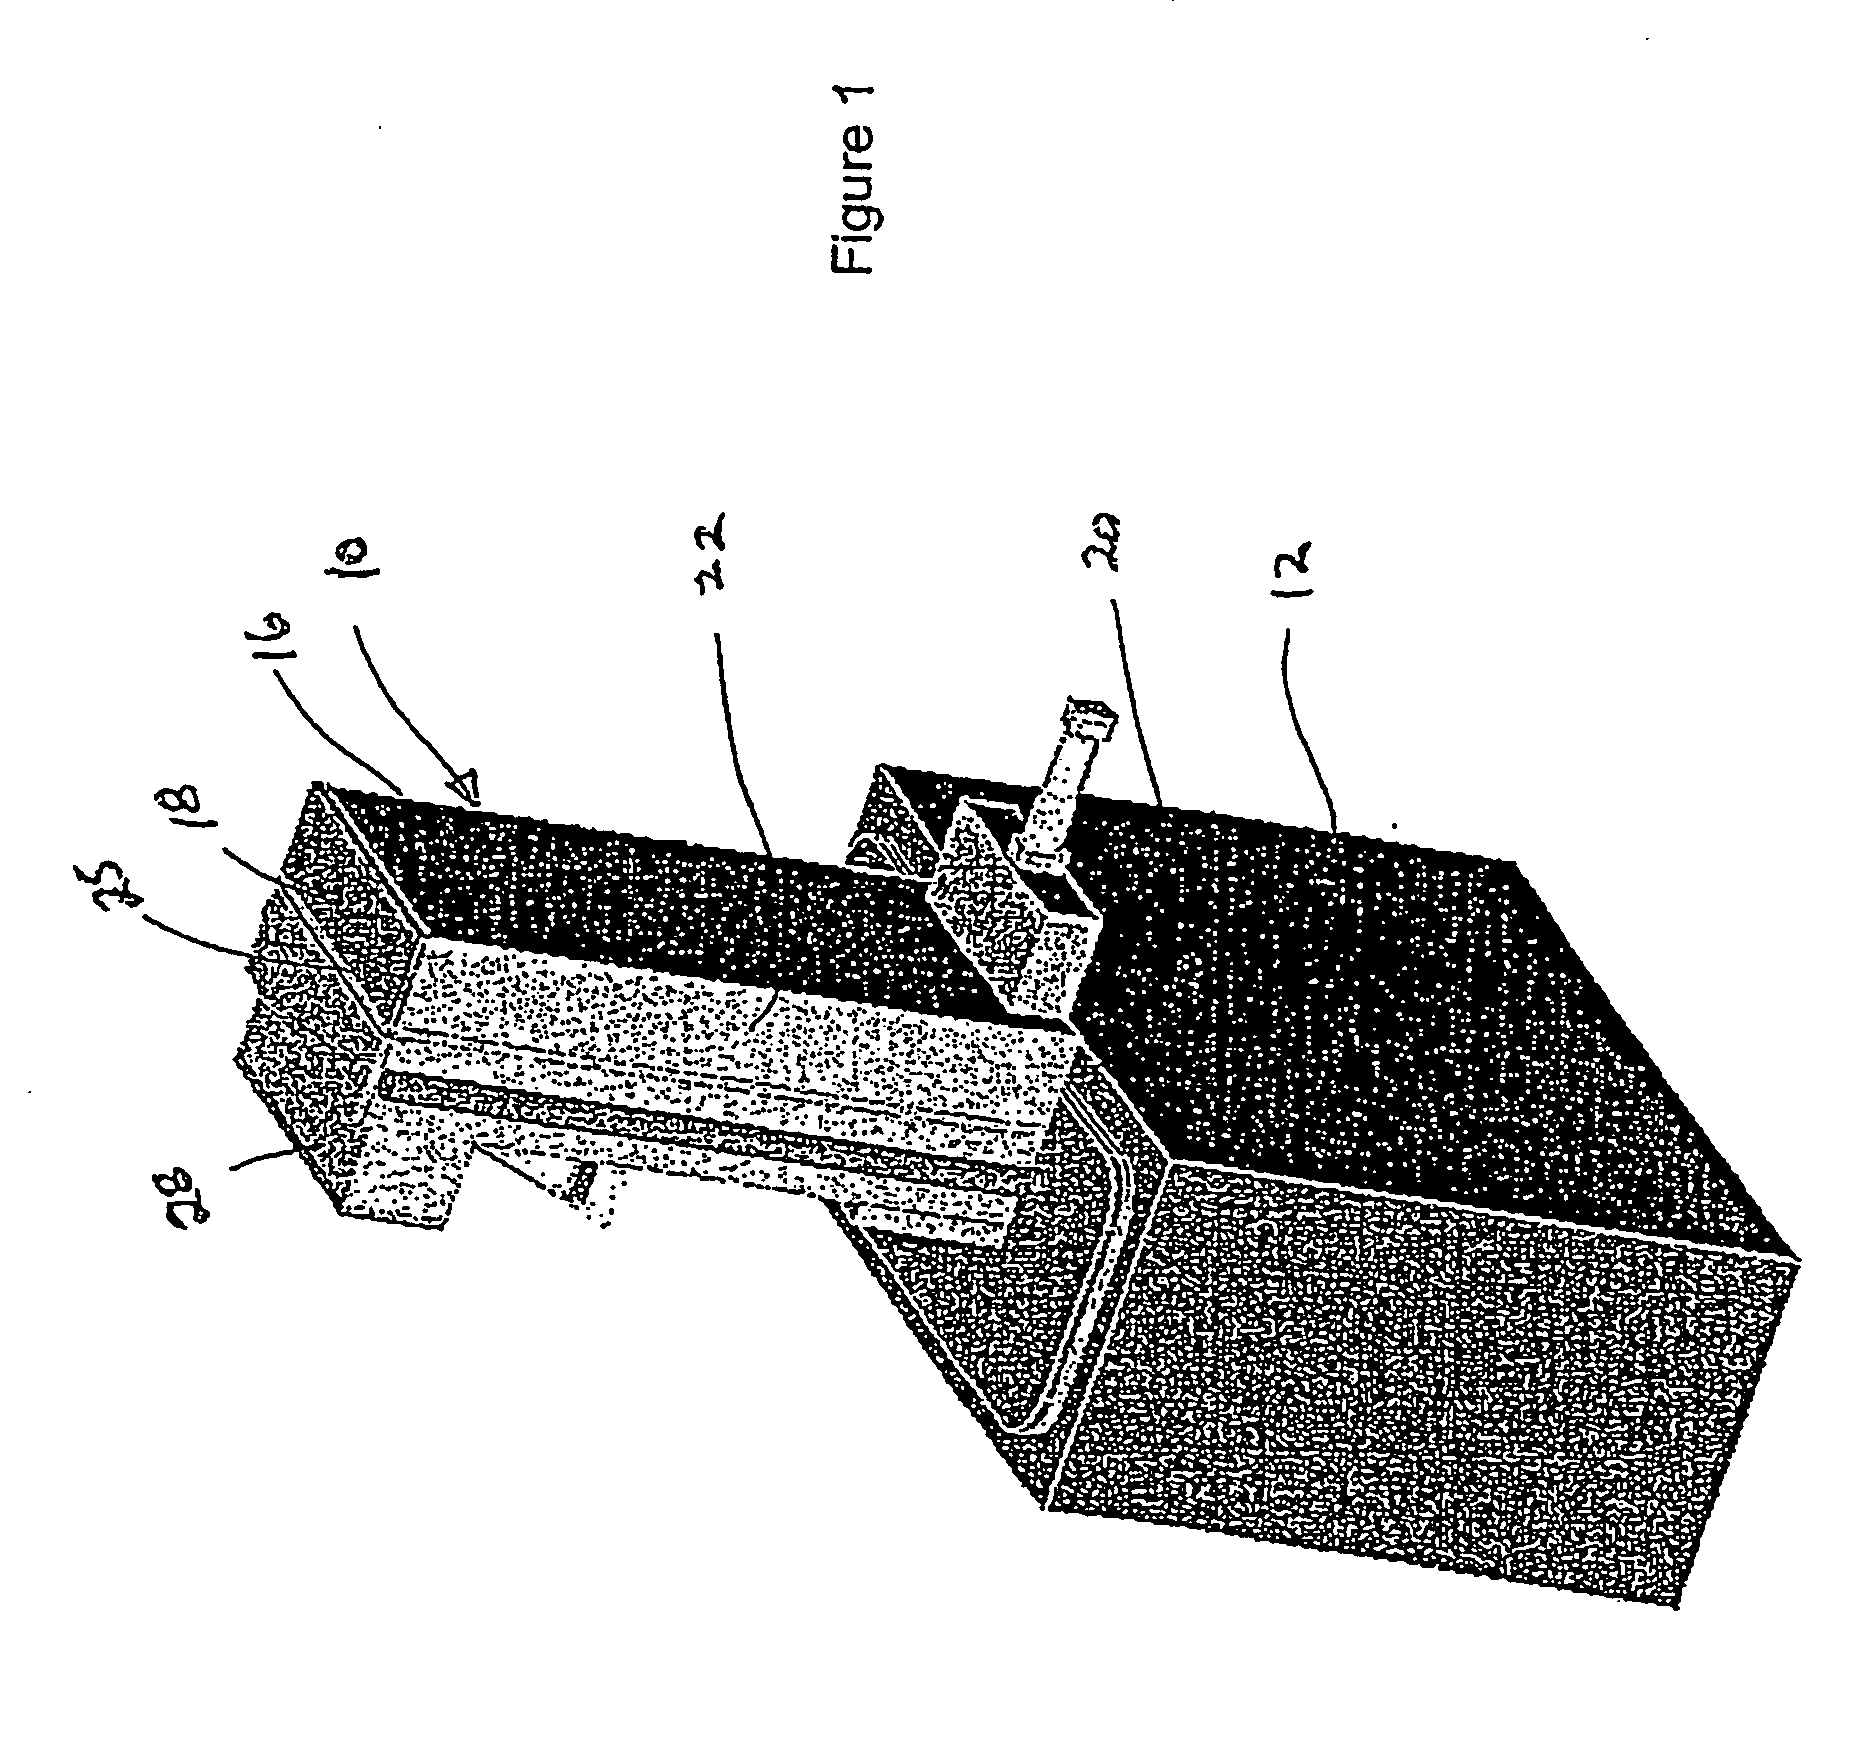 Method and apparatus for preheating and distributing ingots